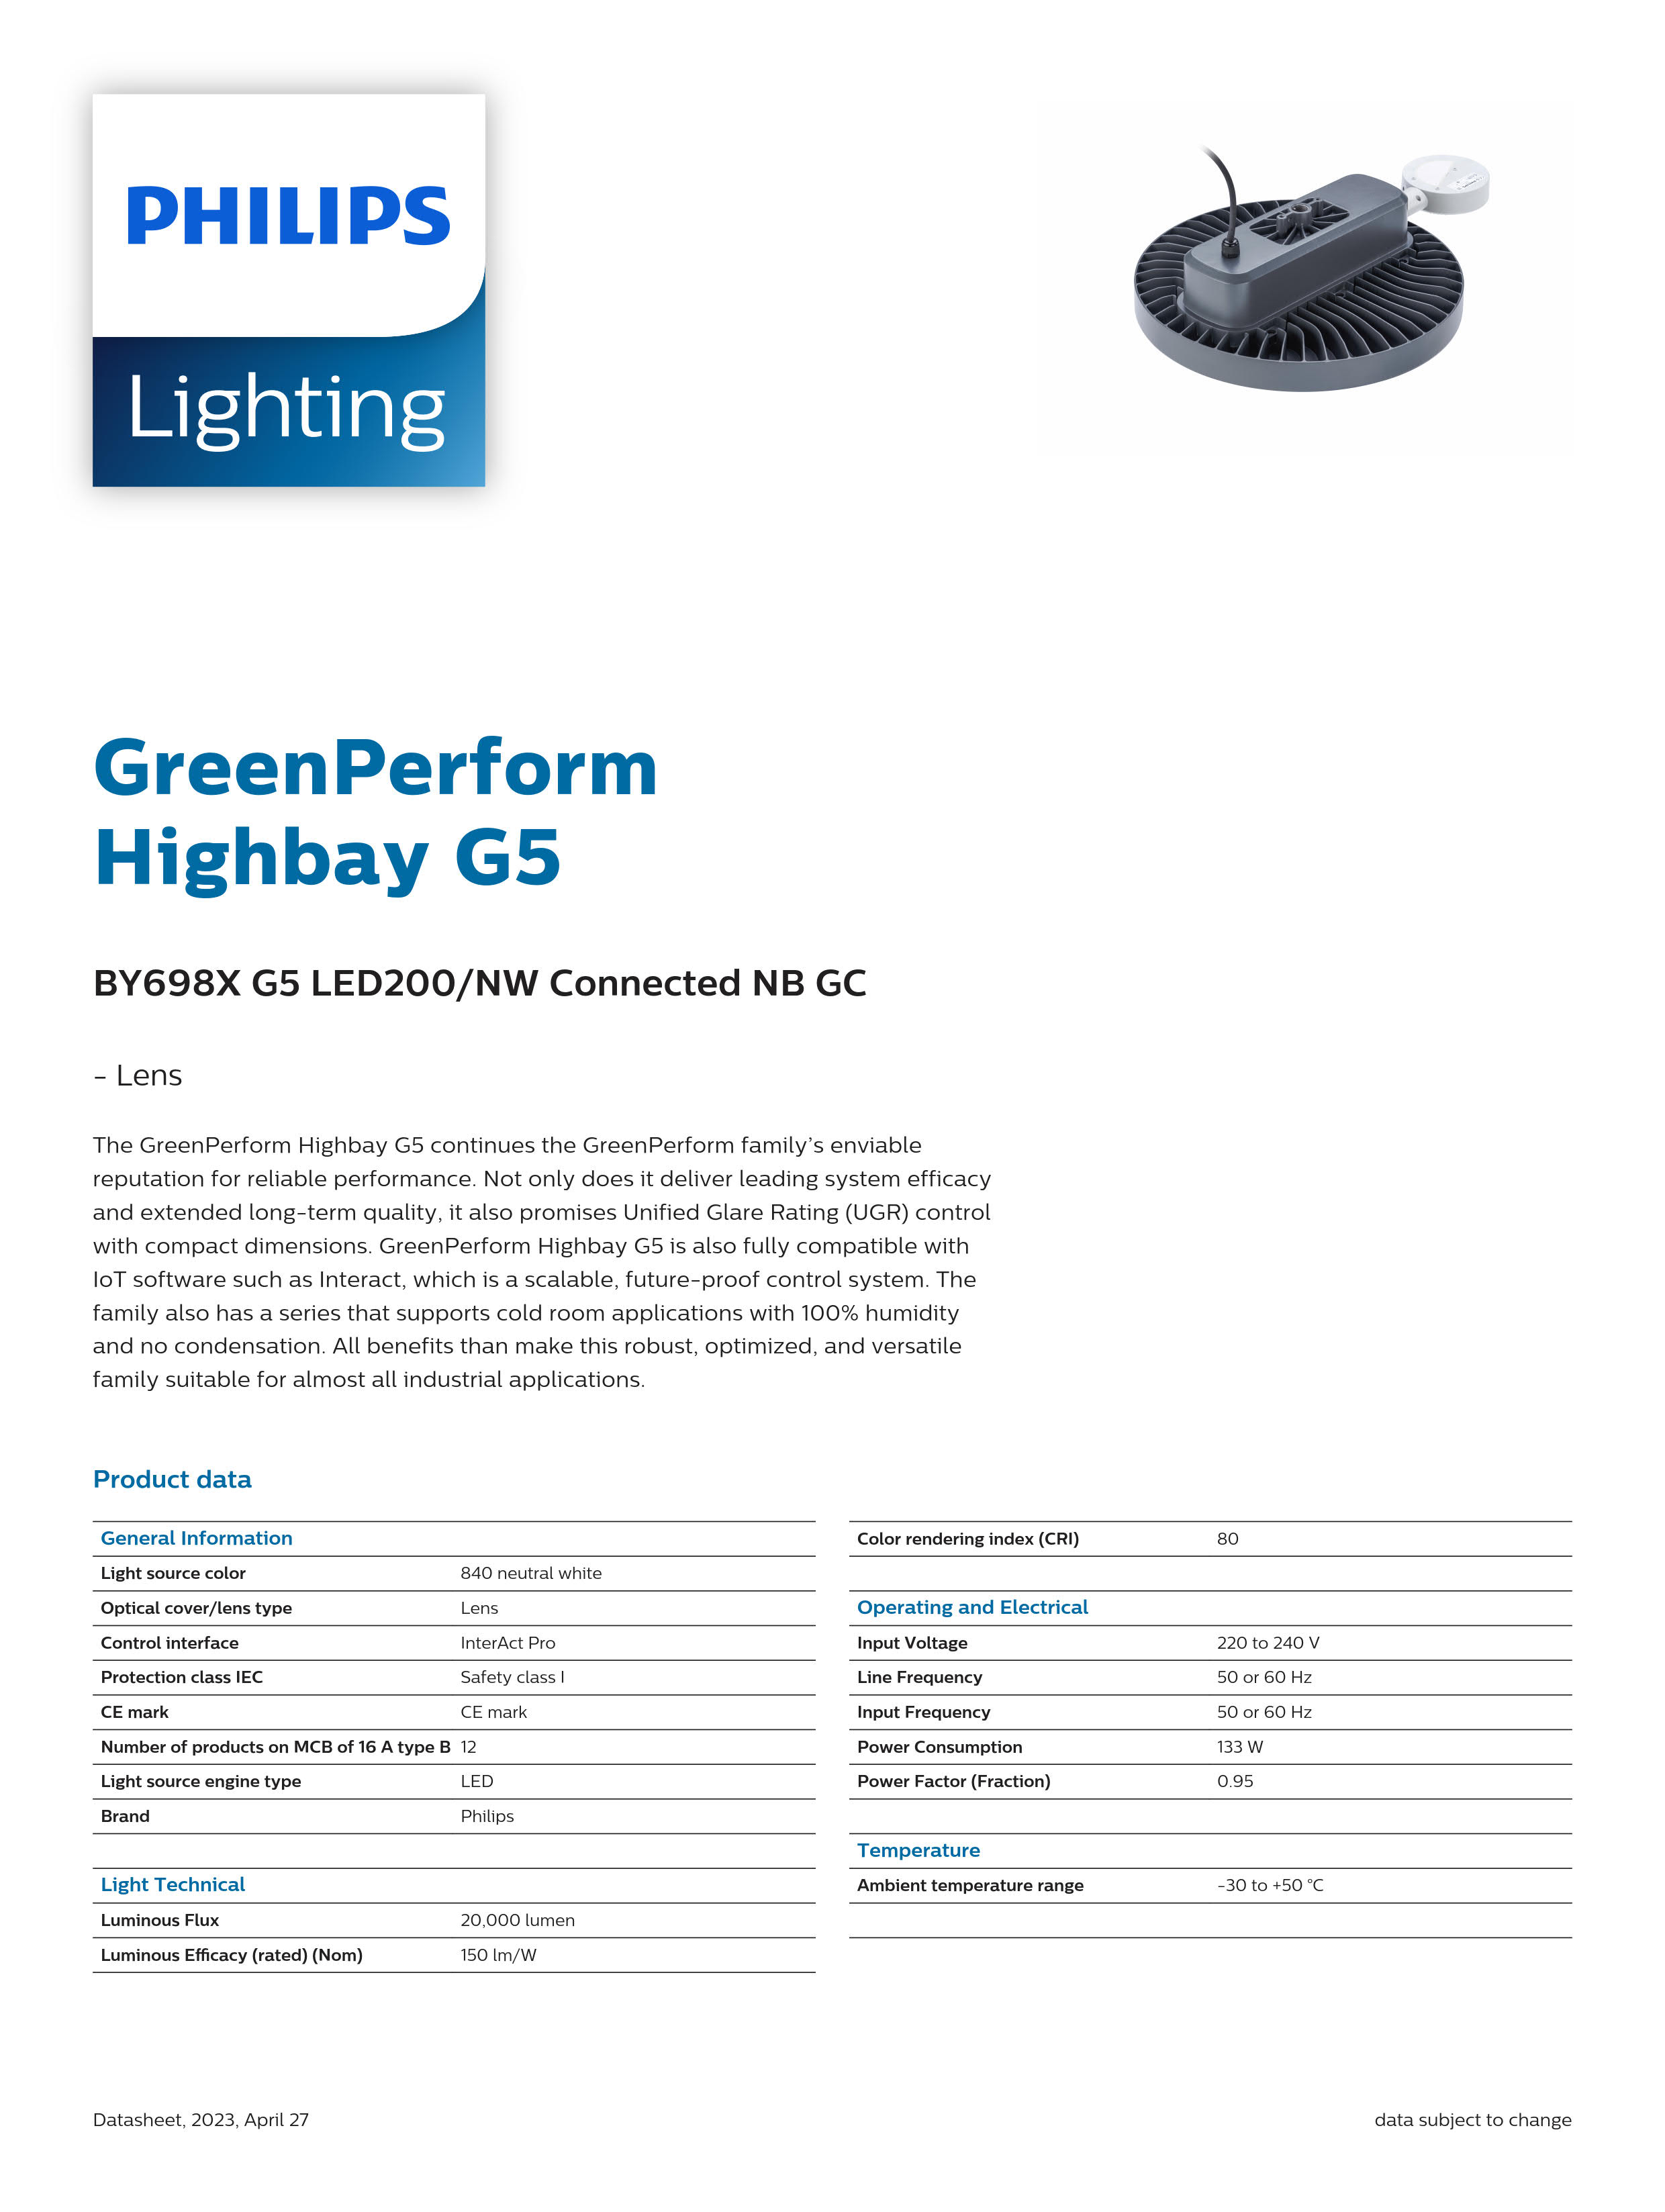 PHILIPS Highbay BY698X G5 LED200/NW Connected NB GC 911401524491